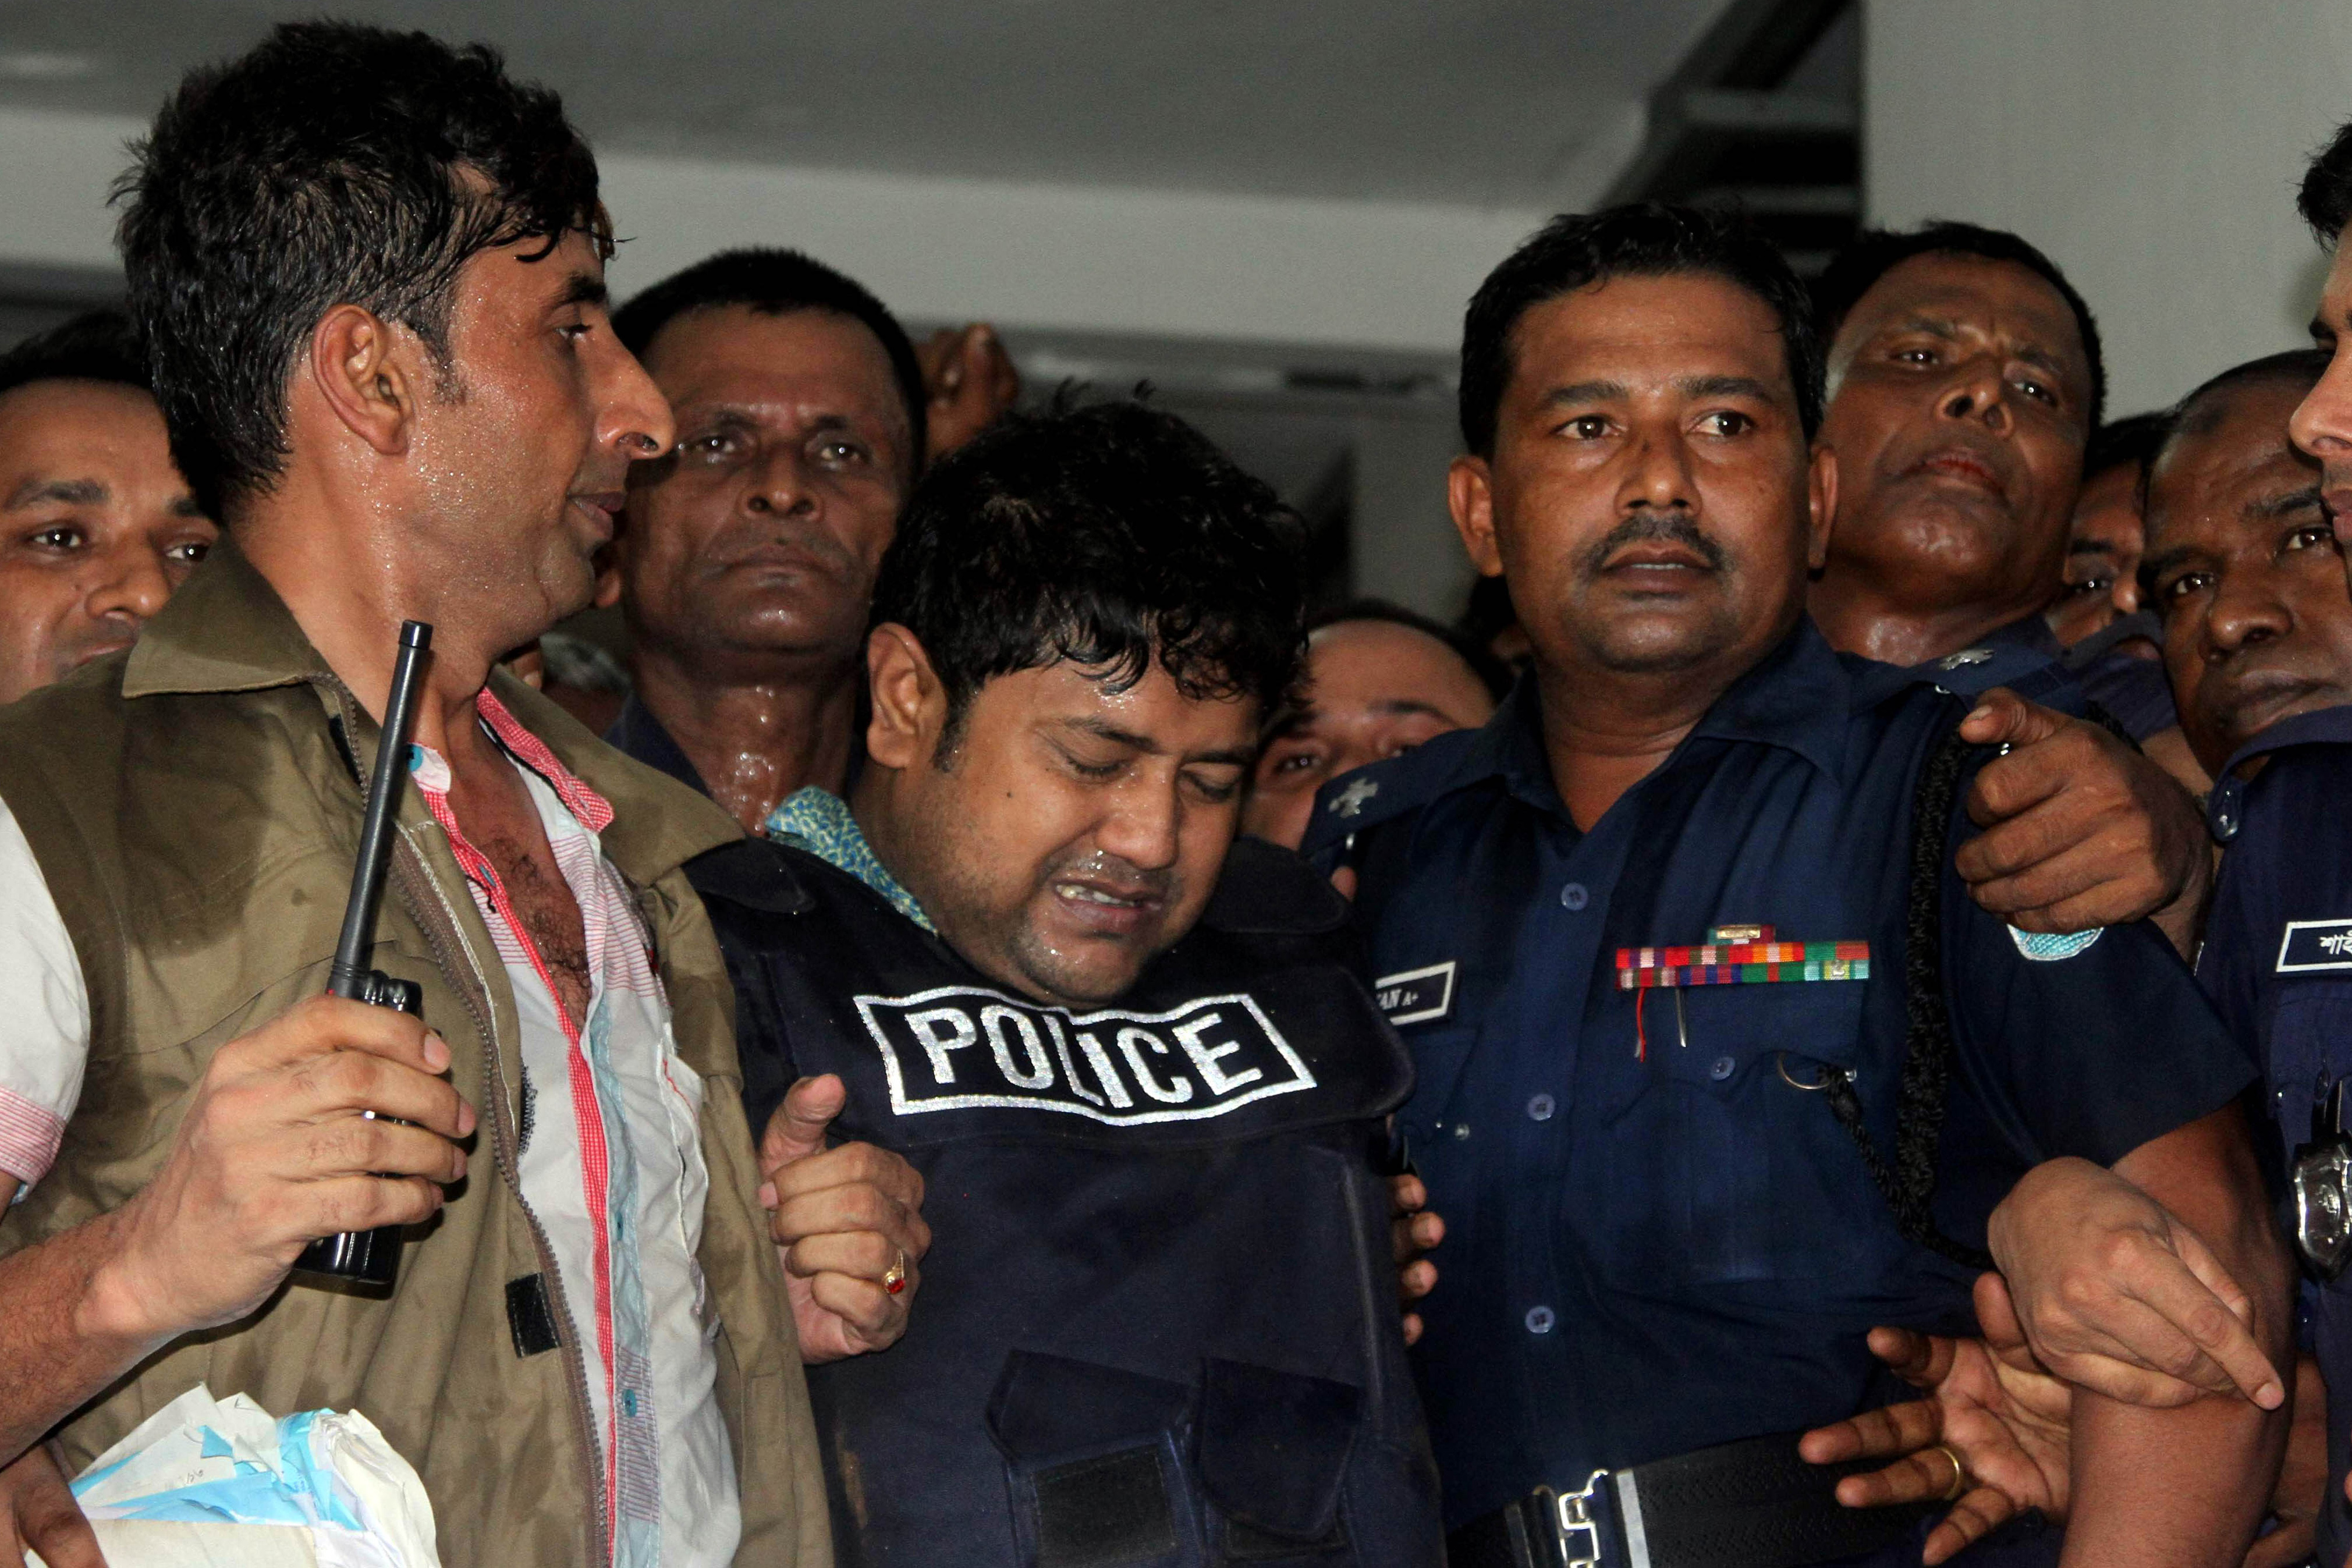 Bangladeshi property tycoon Sohel Rana (C), seen wearing police-issue body armor, is escorted for his appearance in court in Dhaka on April 29, 2013. (AFP—AFP/Getty Images)